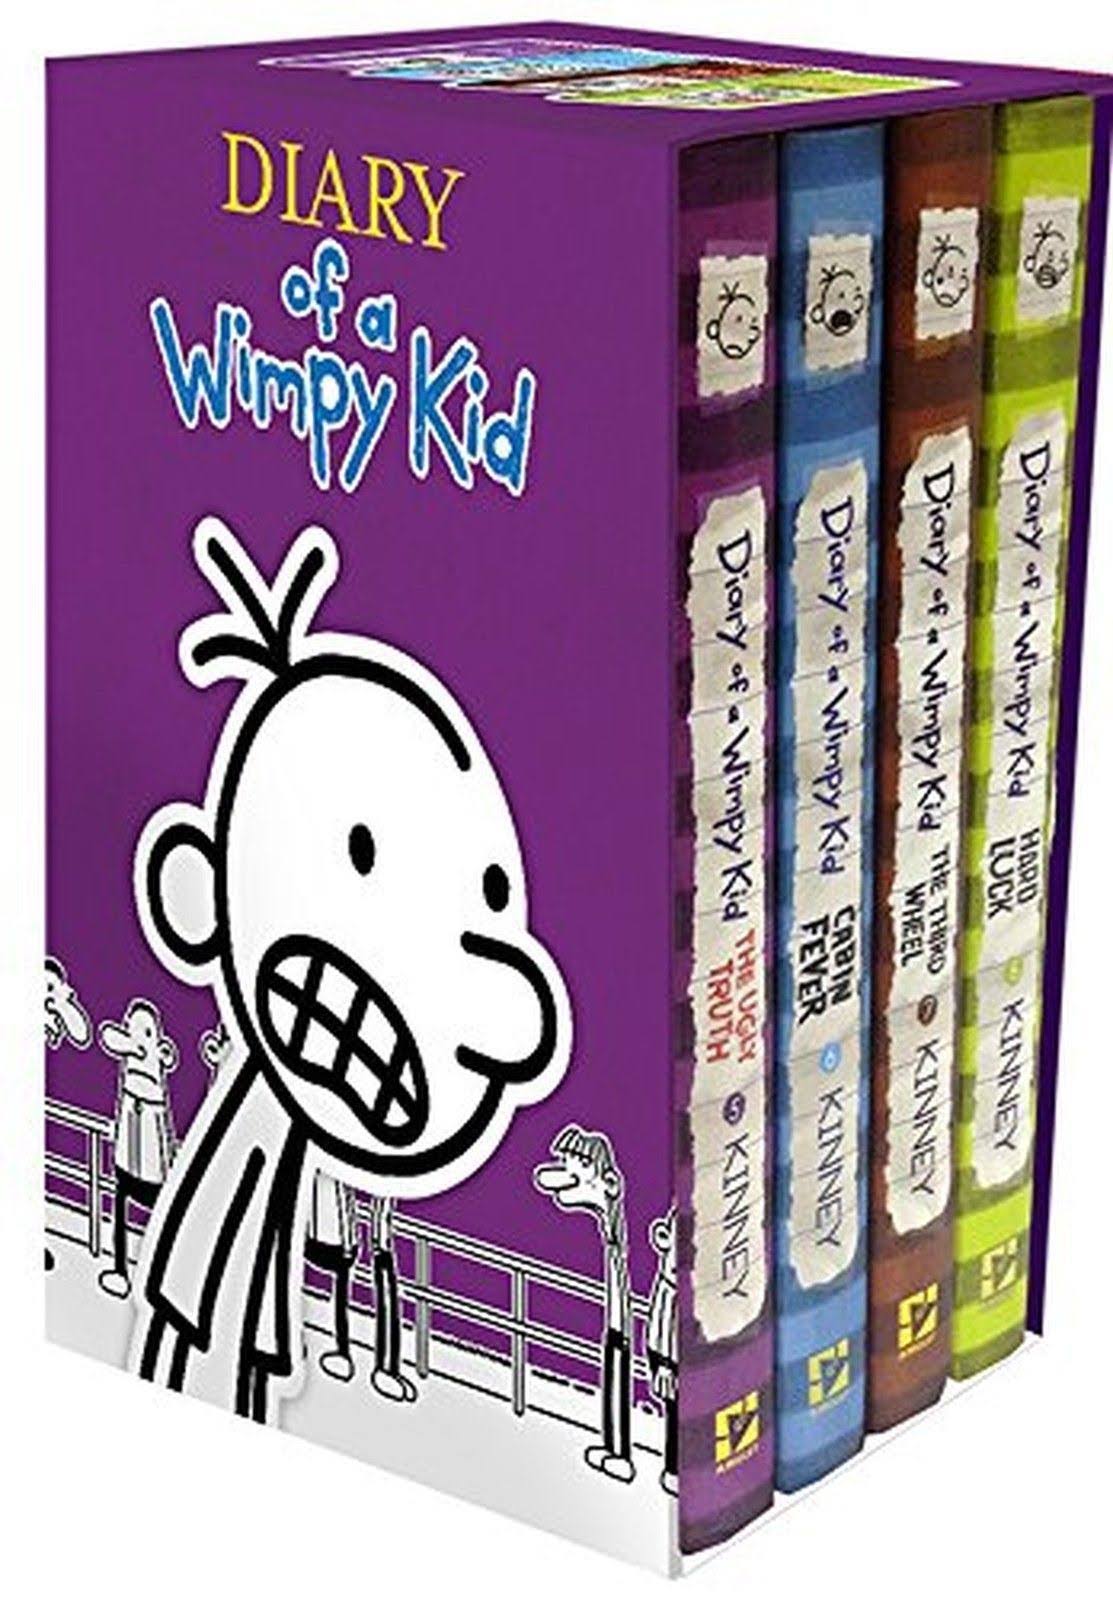 Diary of a Wimpy Kid Box of Books 5 to 8 - Jeff Kinney